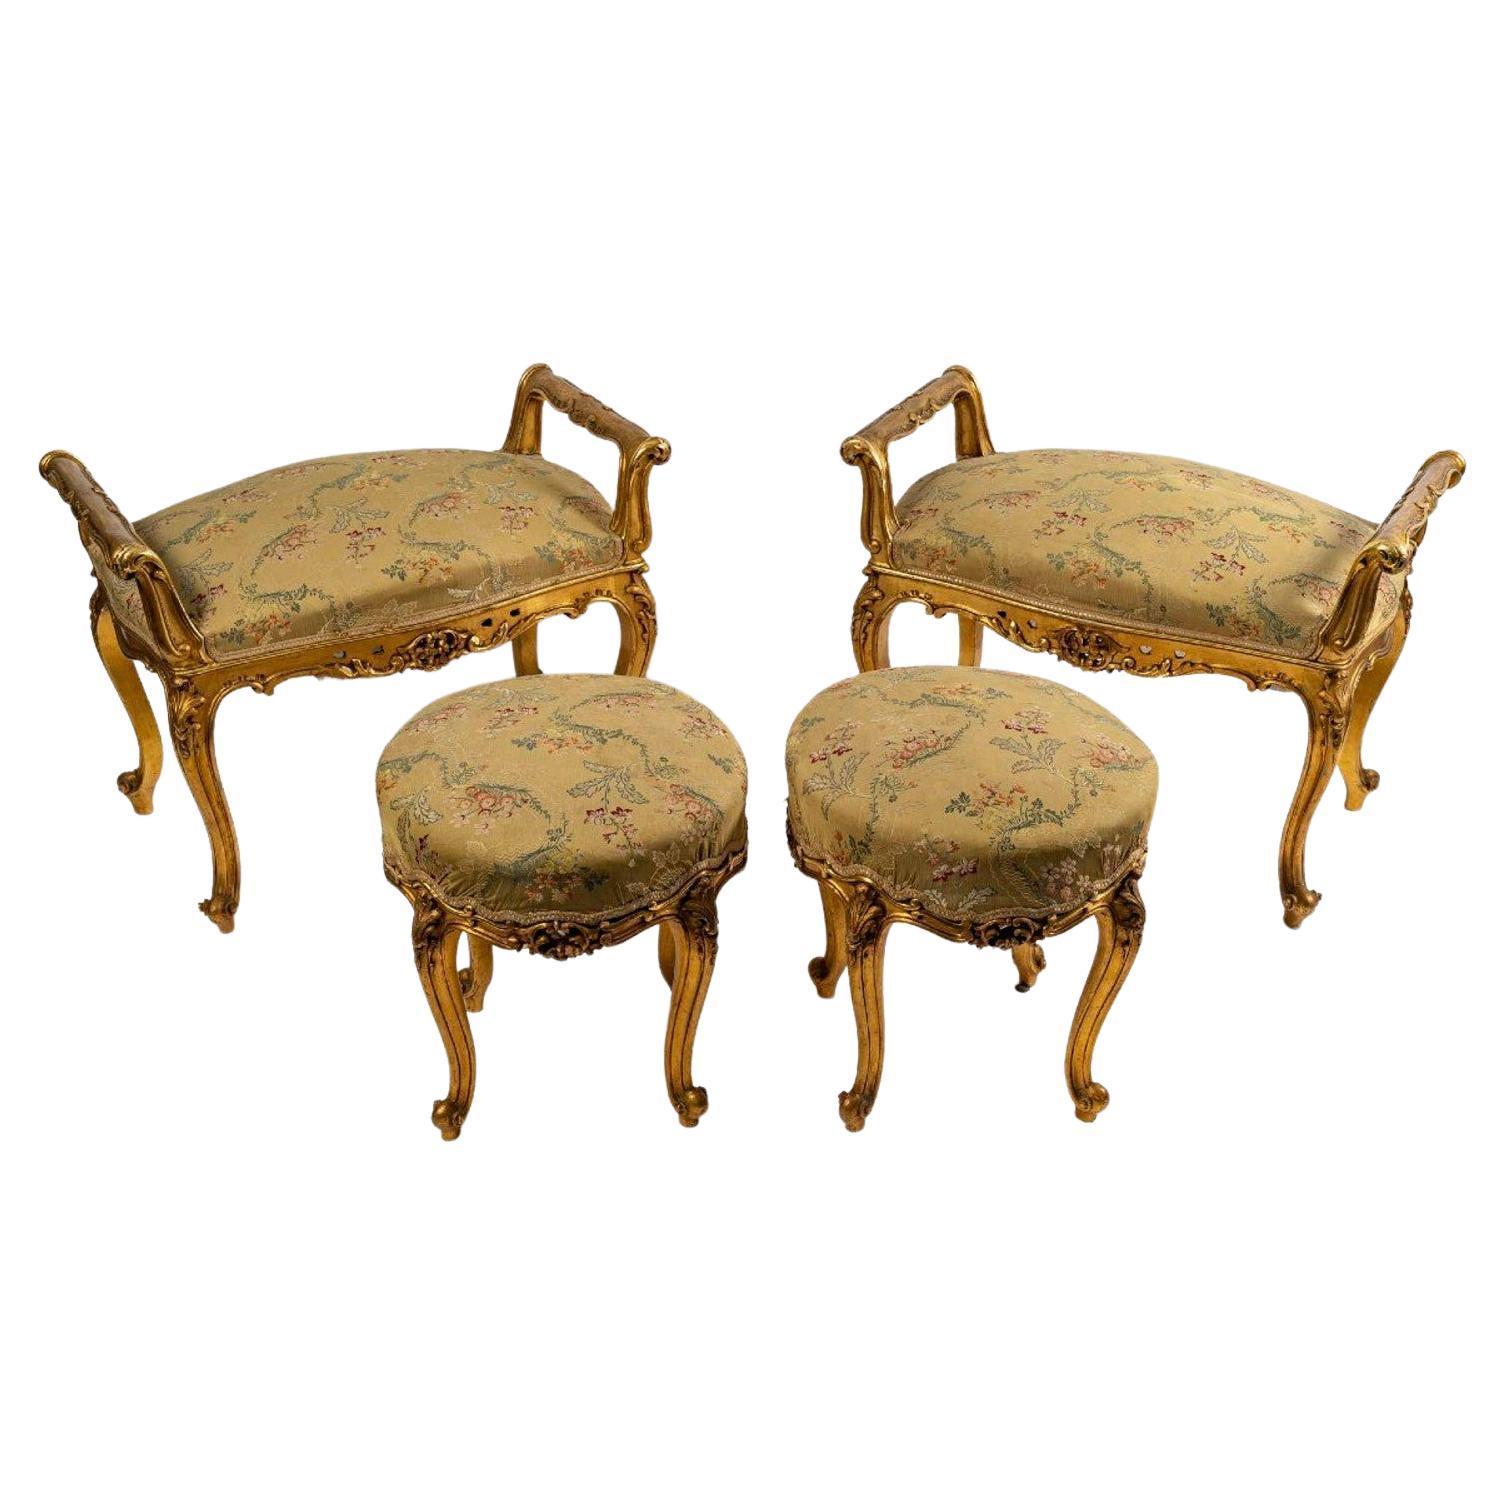 Louis XV style seating set, late 19th century
Two benches and a pair of stools, they are covered with a floral fabric
Bench 
 H: 57 cm, W: 77 cm, D: 46 cm
Stool 
 H: 47 cm, D: 43 cm.